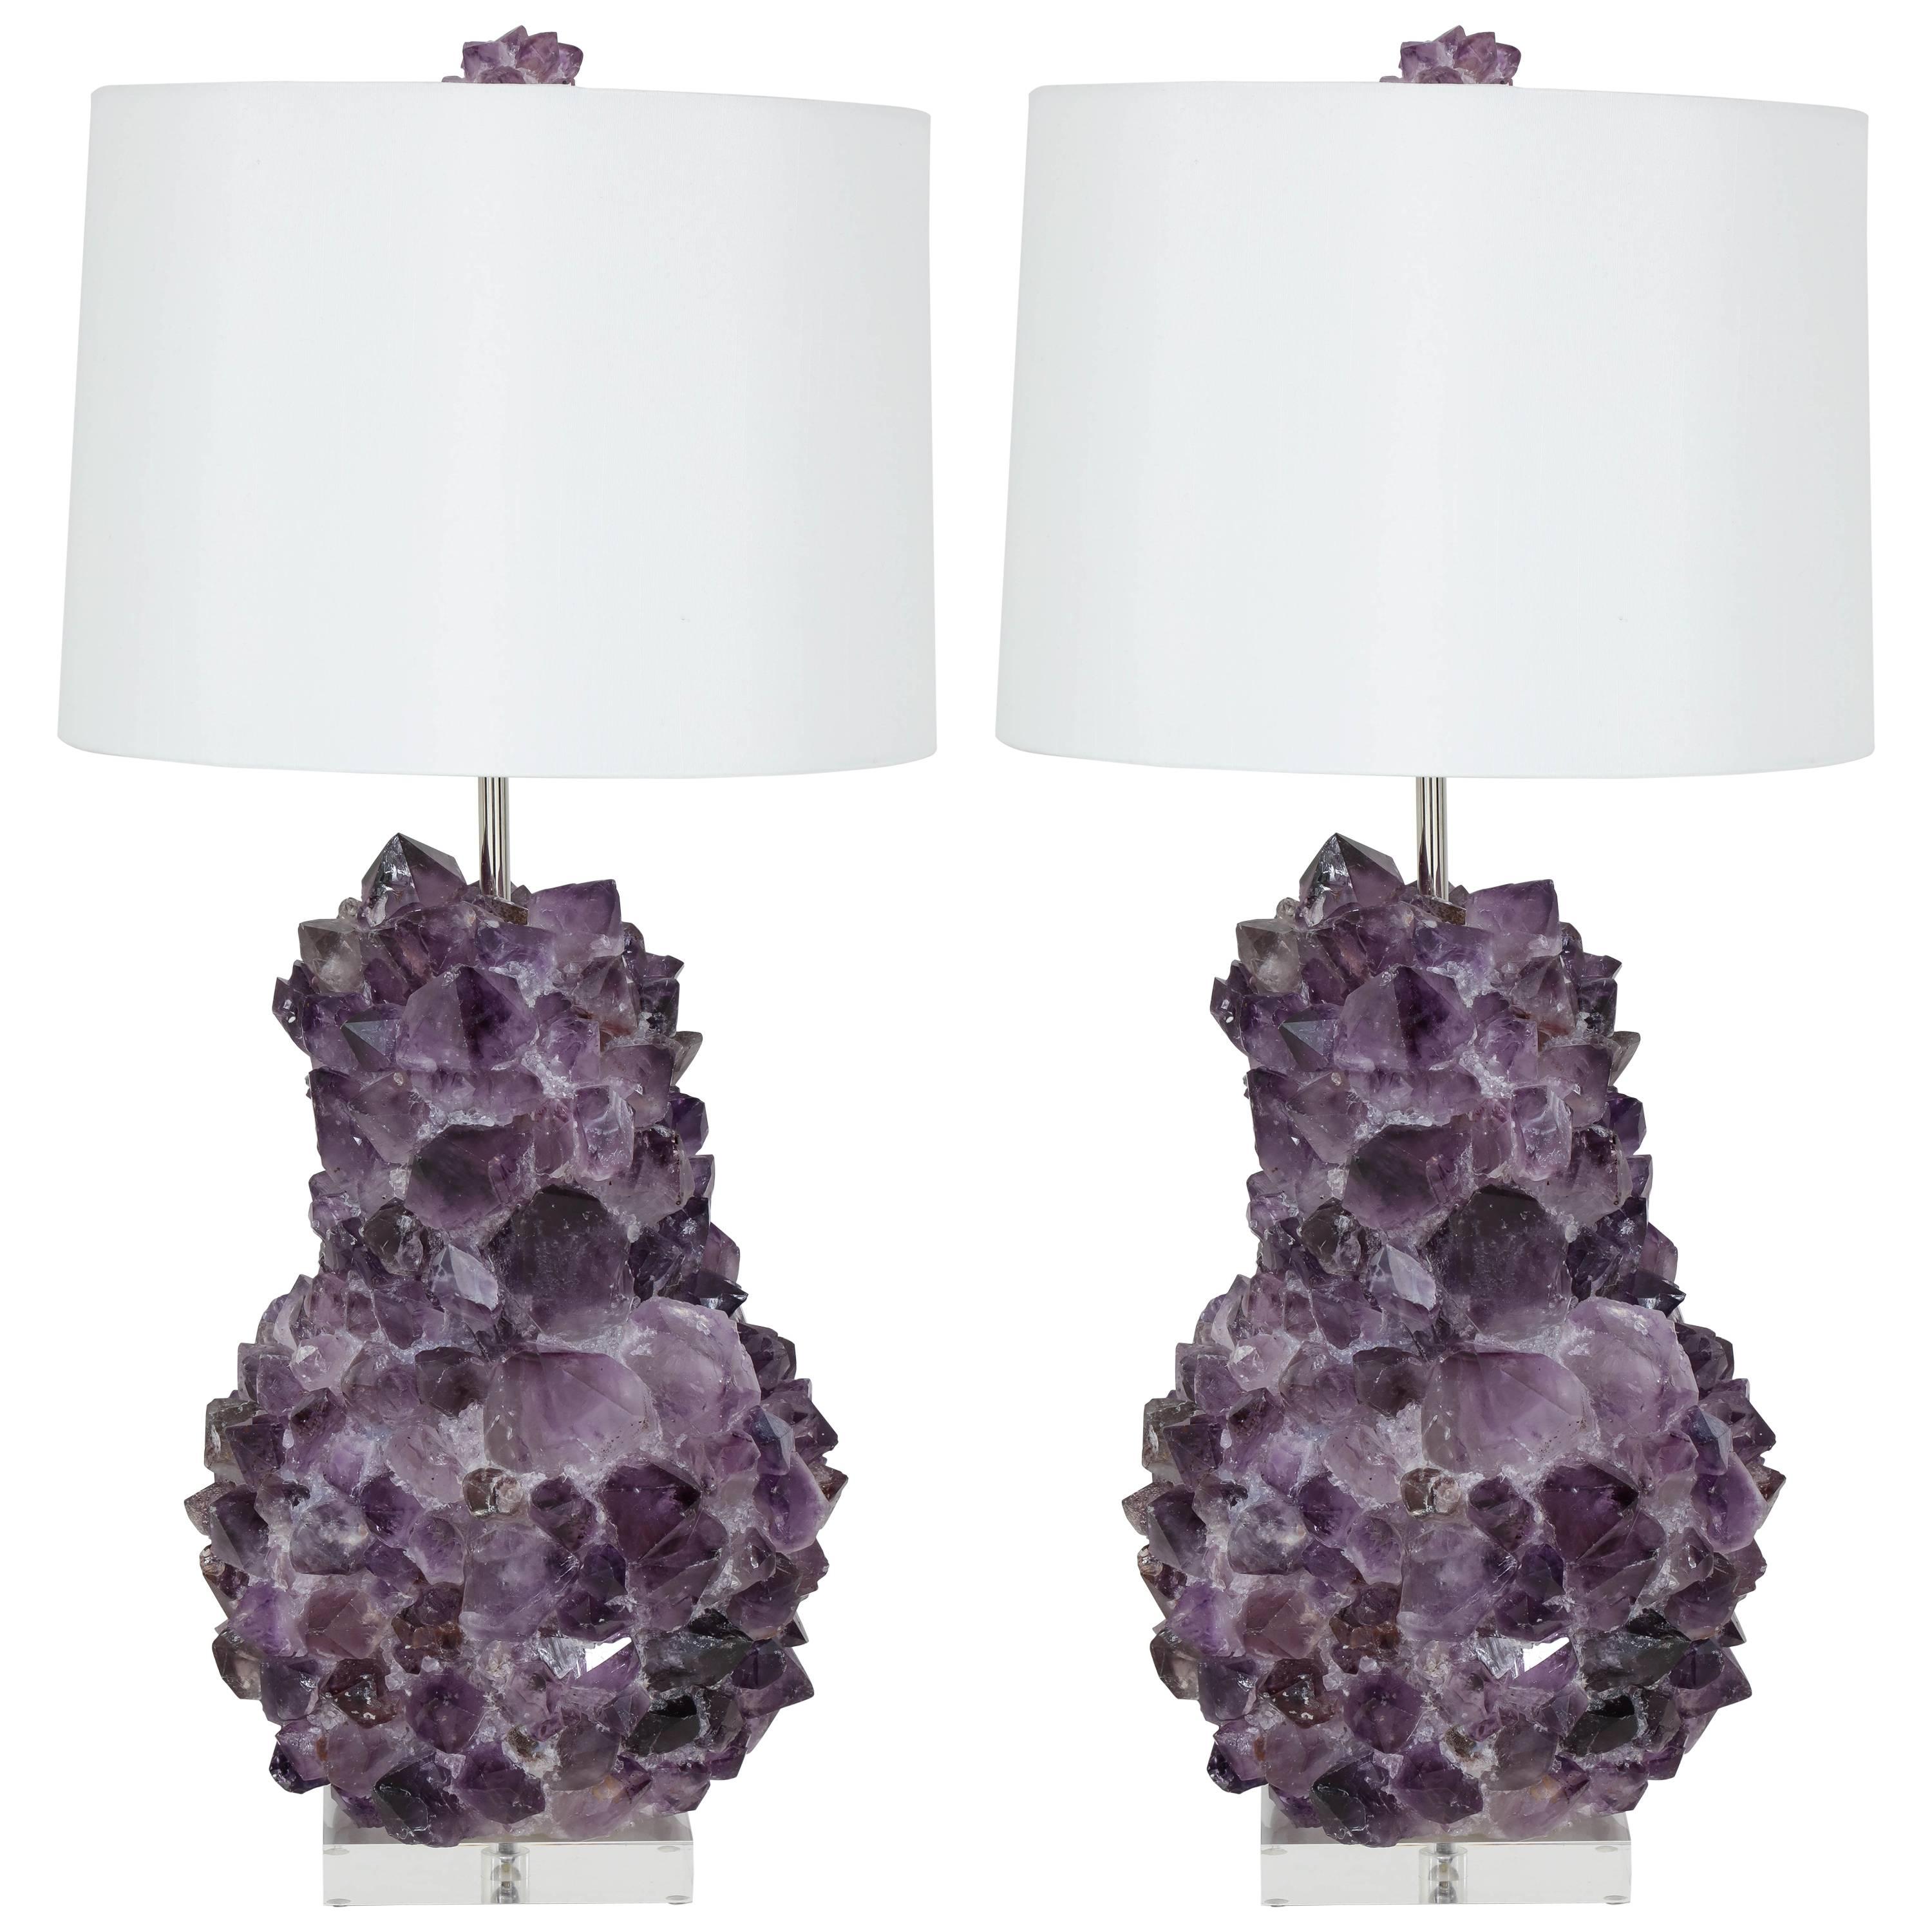 Pair of Faceted Amethyst Quartz Crystal Lamps